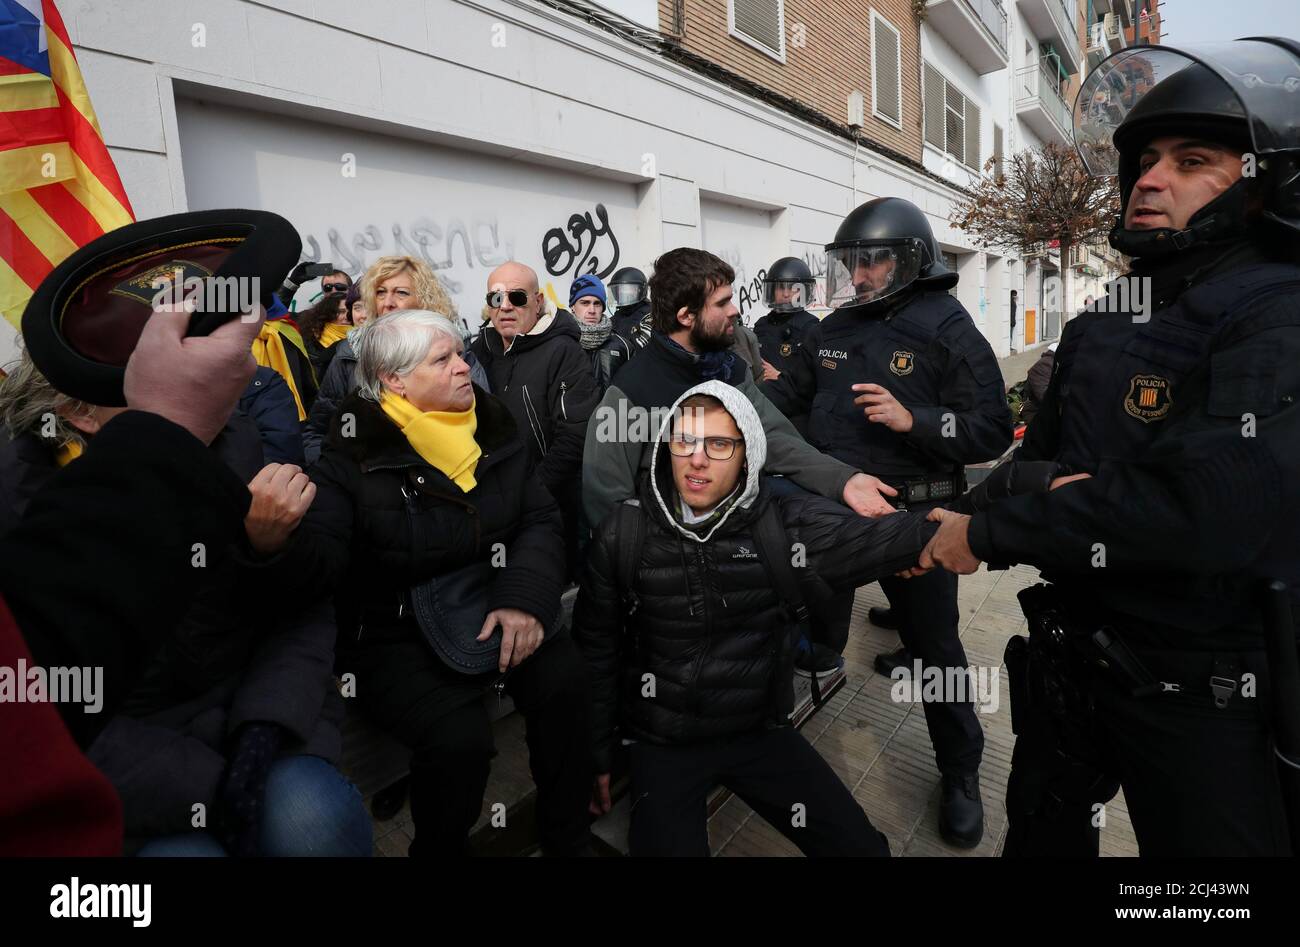 Mossos d'Escuadra police remove protestors from the entrance of People's Party (PP) meeting in Lleida, Spain, December 18, 2017. REUTERS/Albert Gea Stock Photo